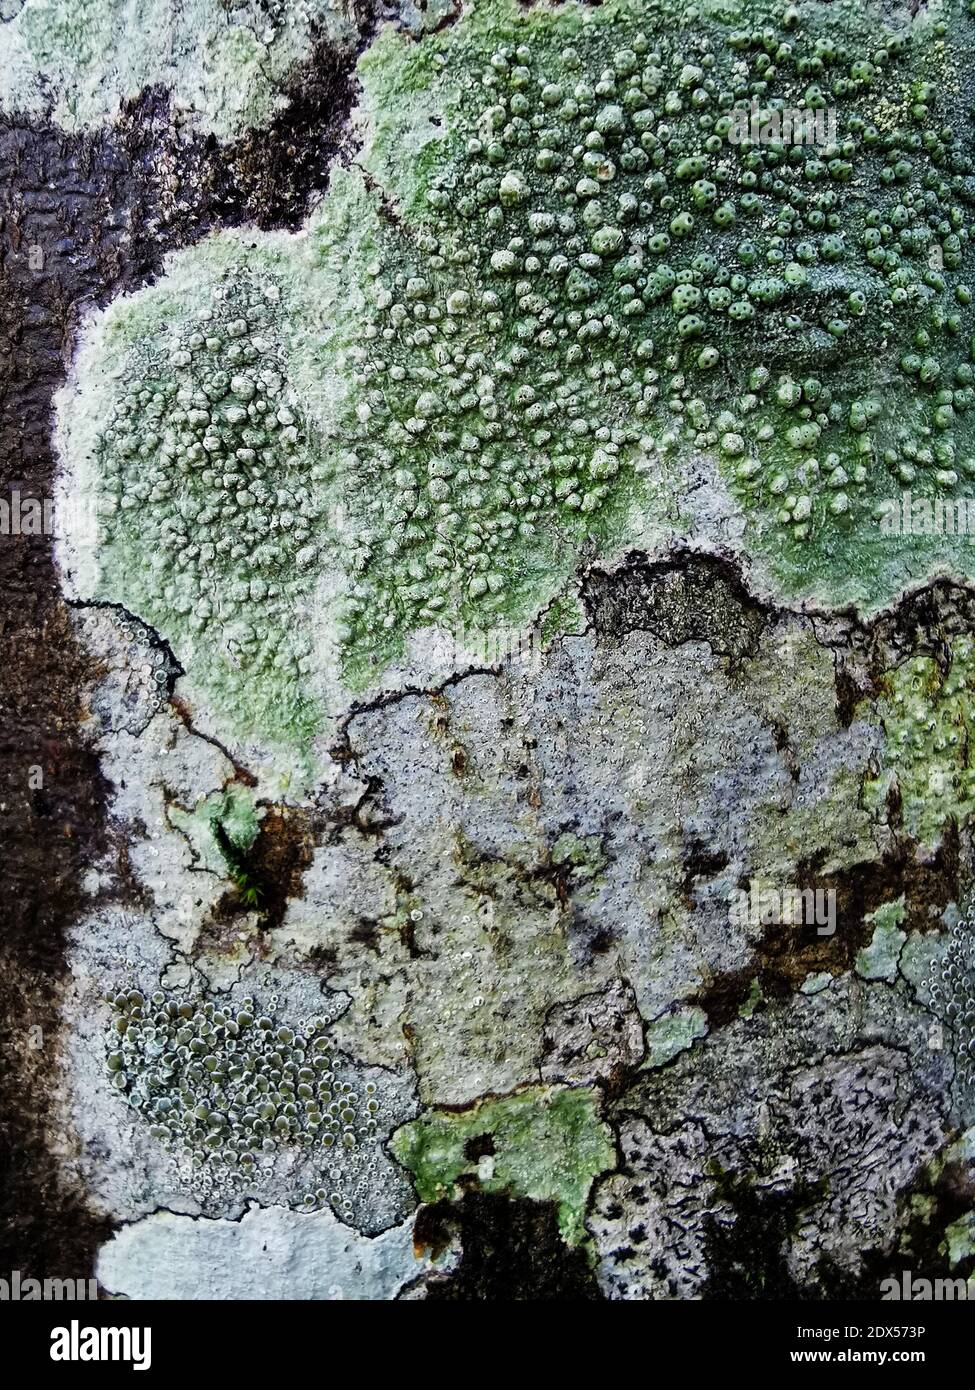 A vertical shot of Pertusaria lichens on the tree surface Stock Photo